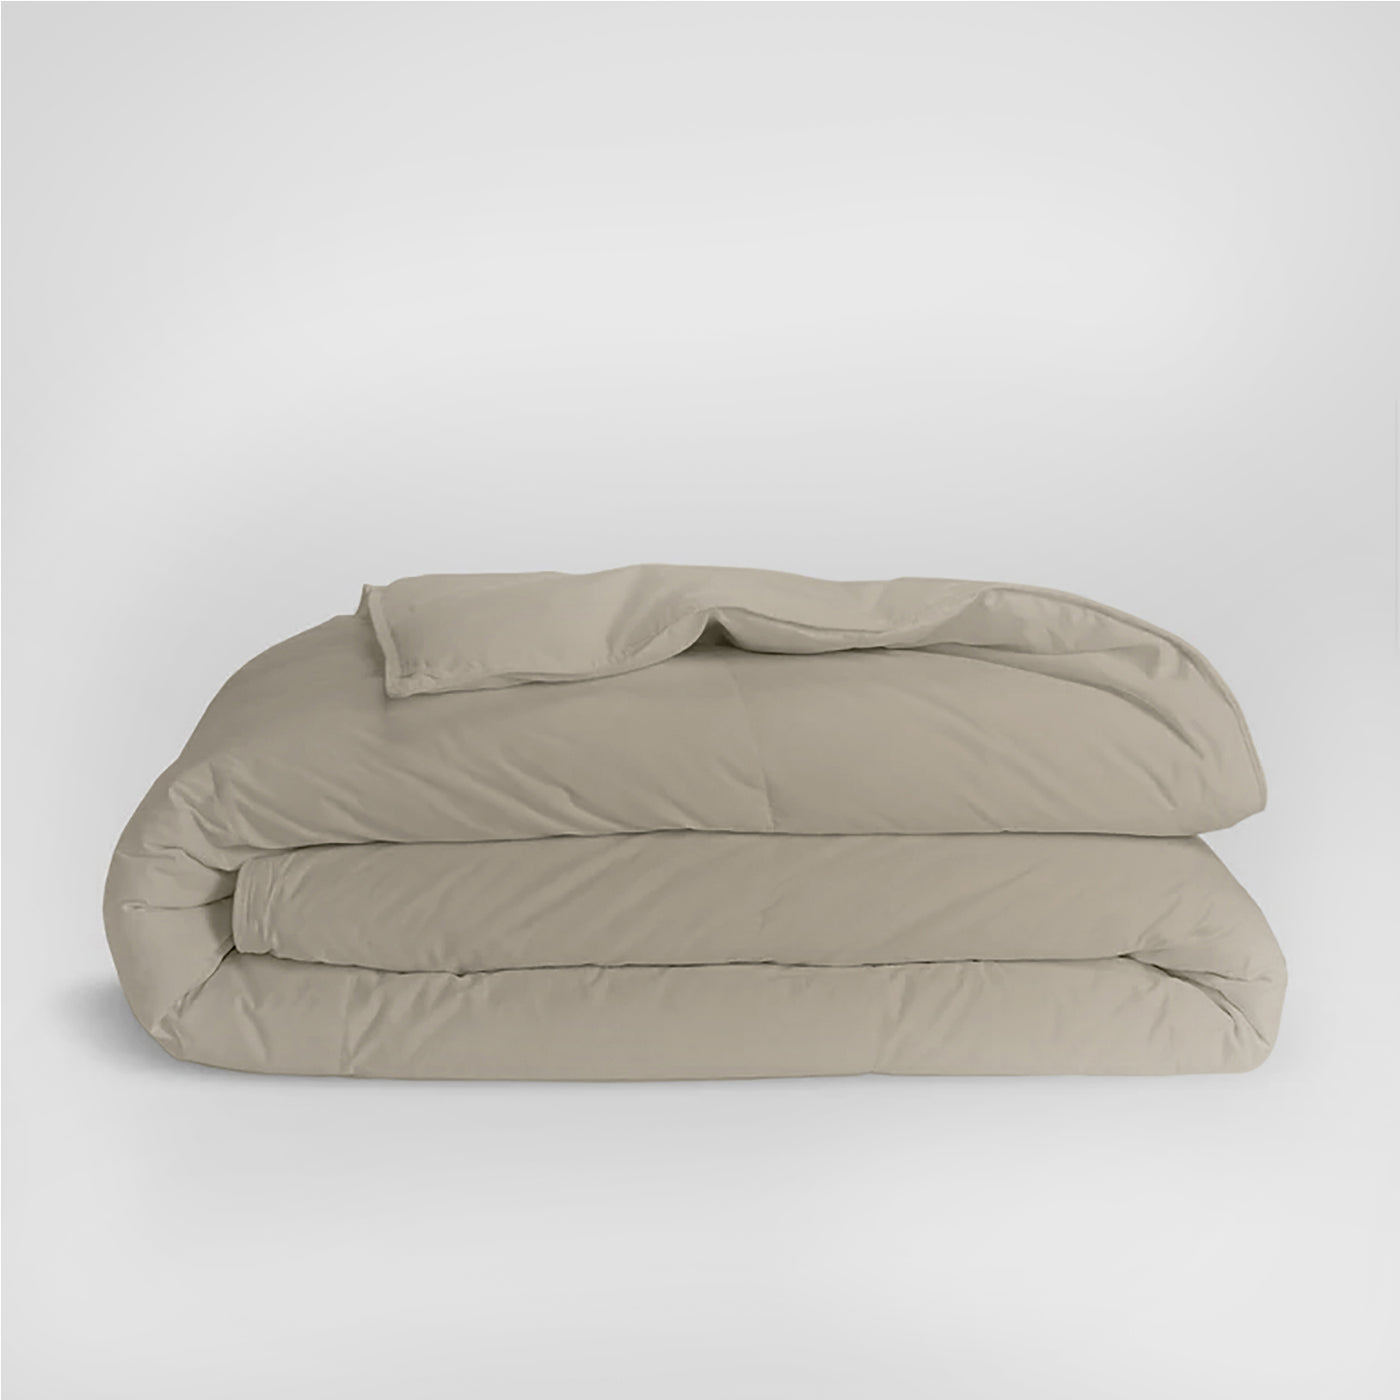 Solid Down Alternative Comforter with Organic Cotton Exterior & Microfiber Fill 600 Thread Count